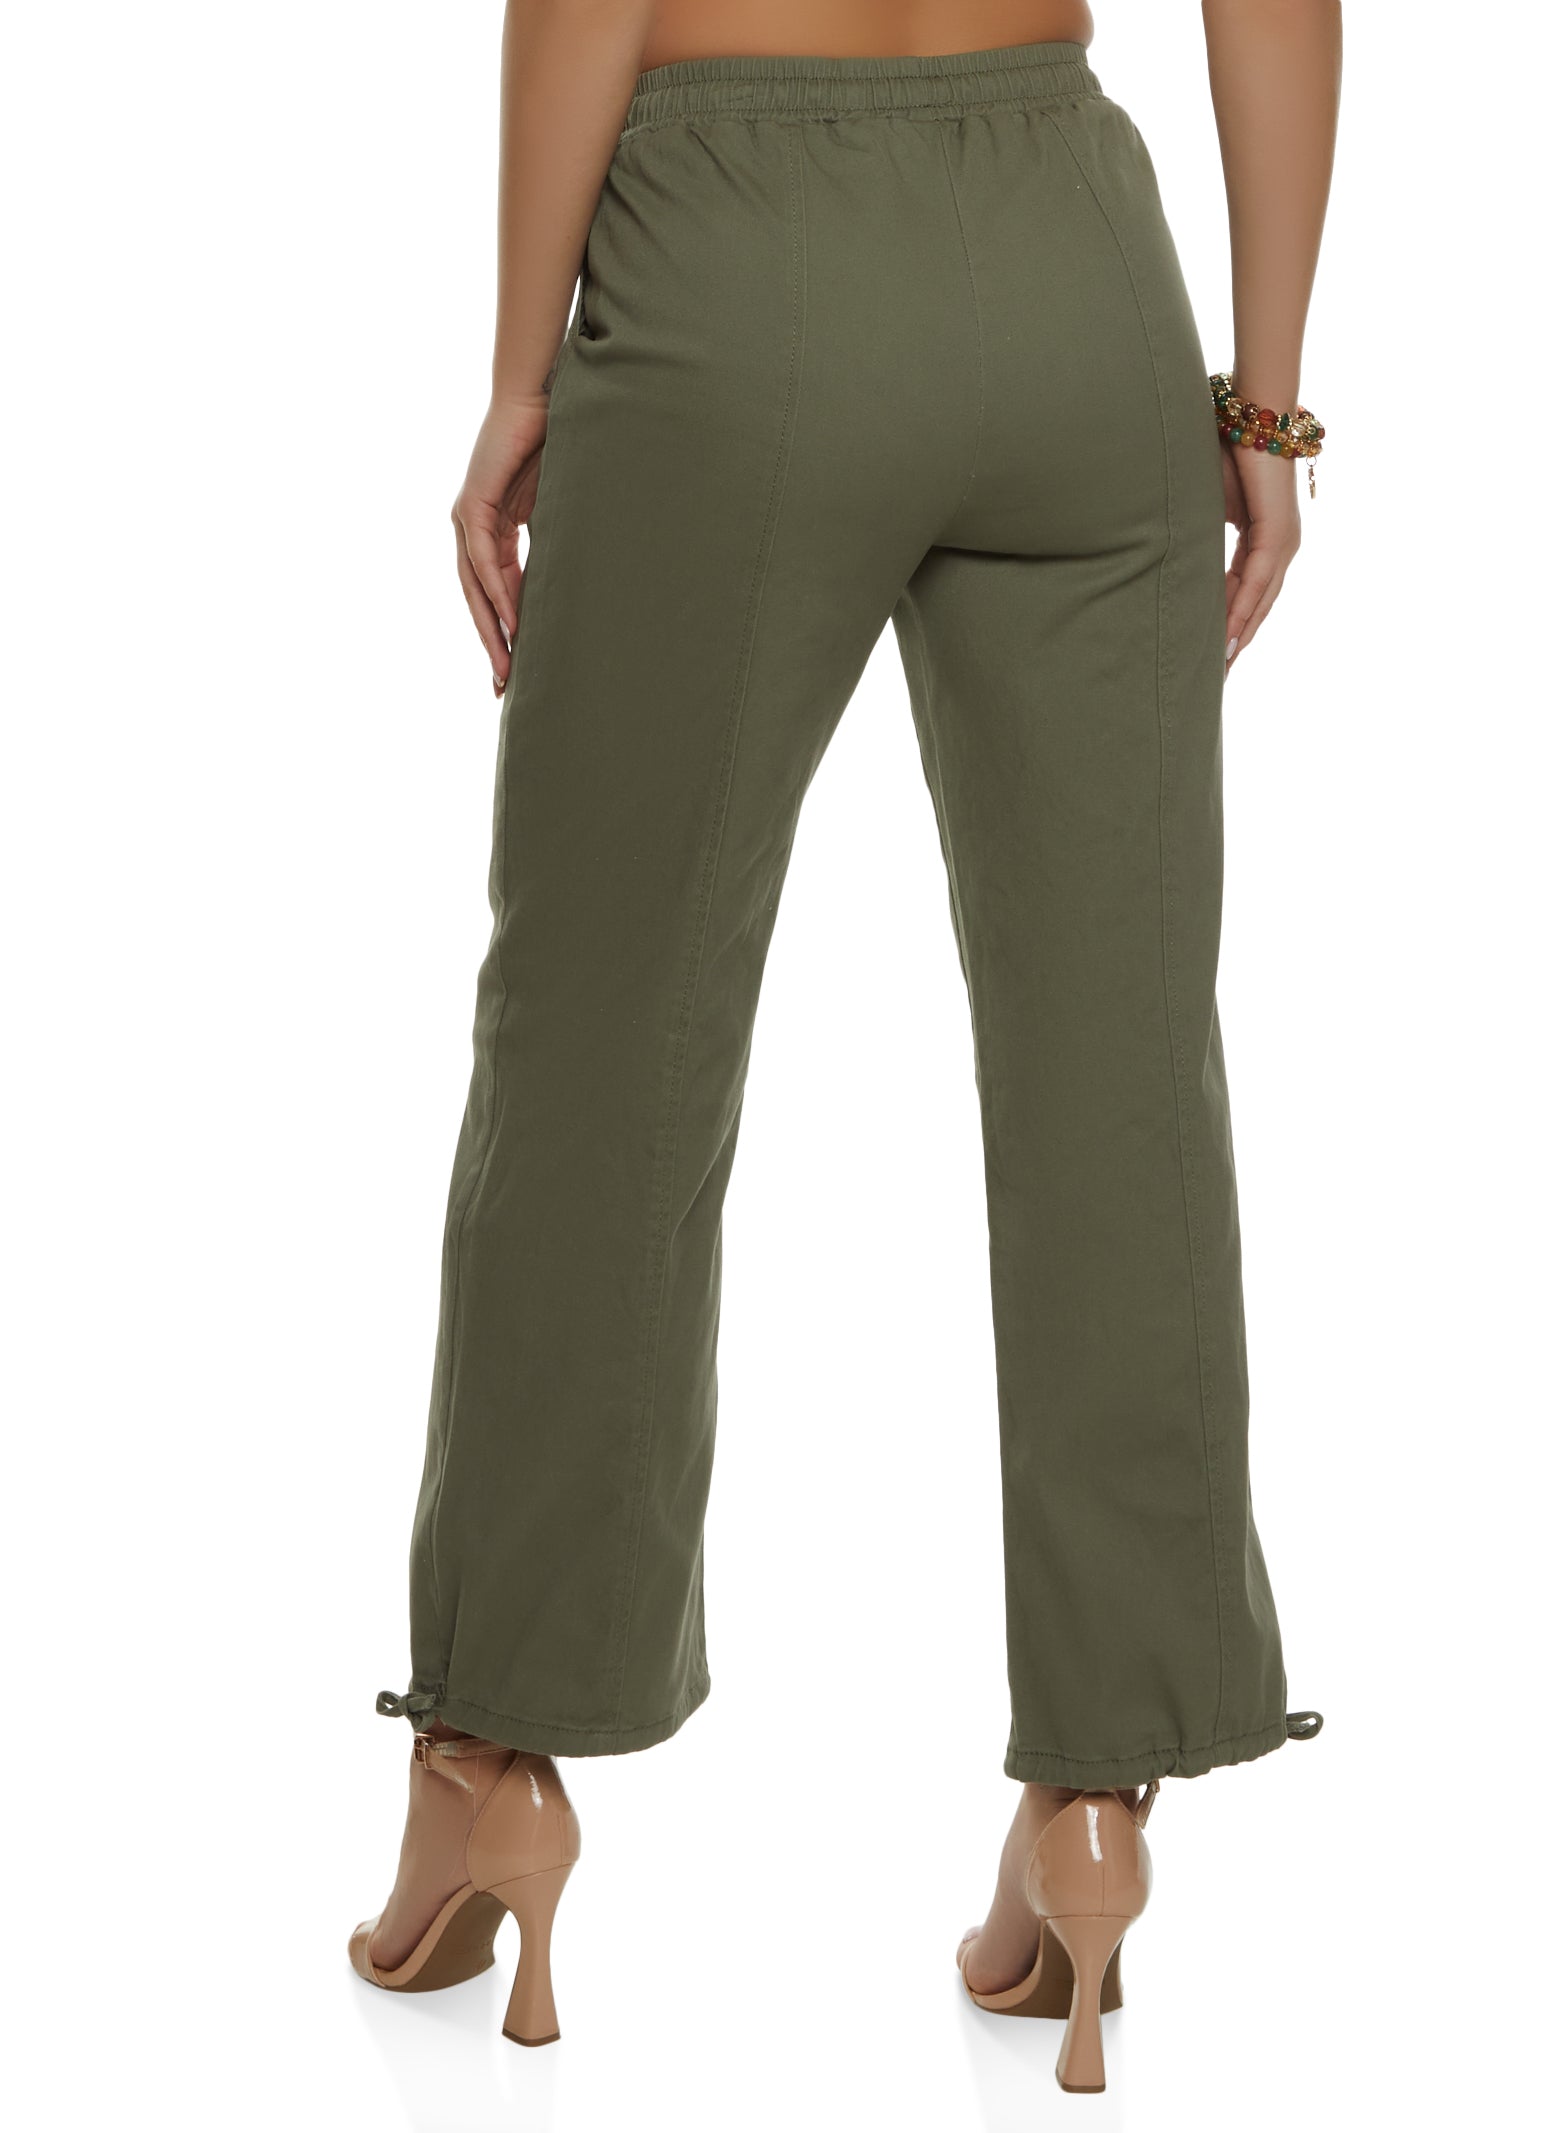 Hyperstretch Rolled Cuff Drawstring Waist Pants